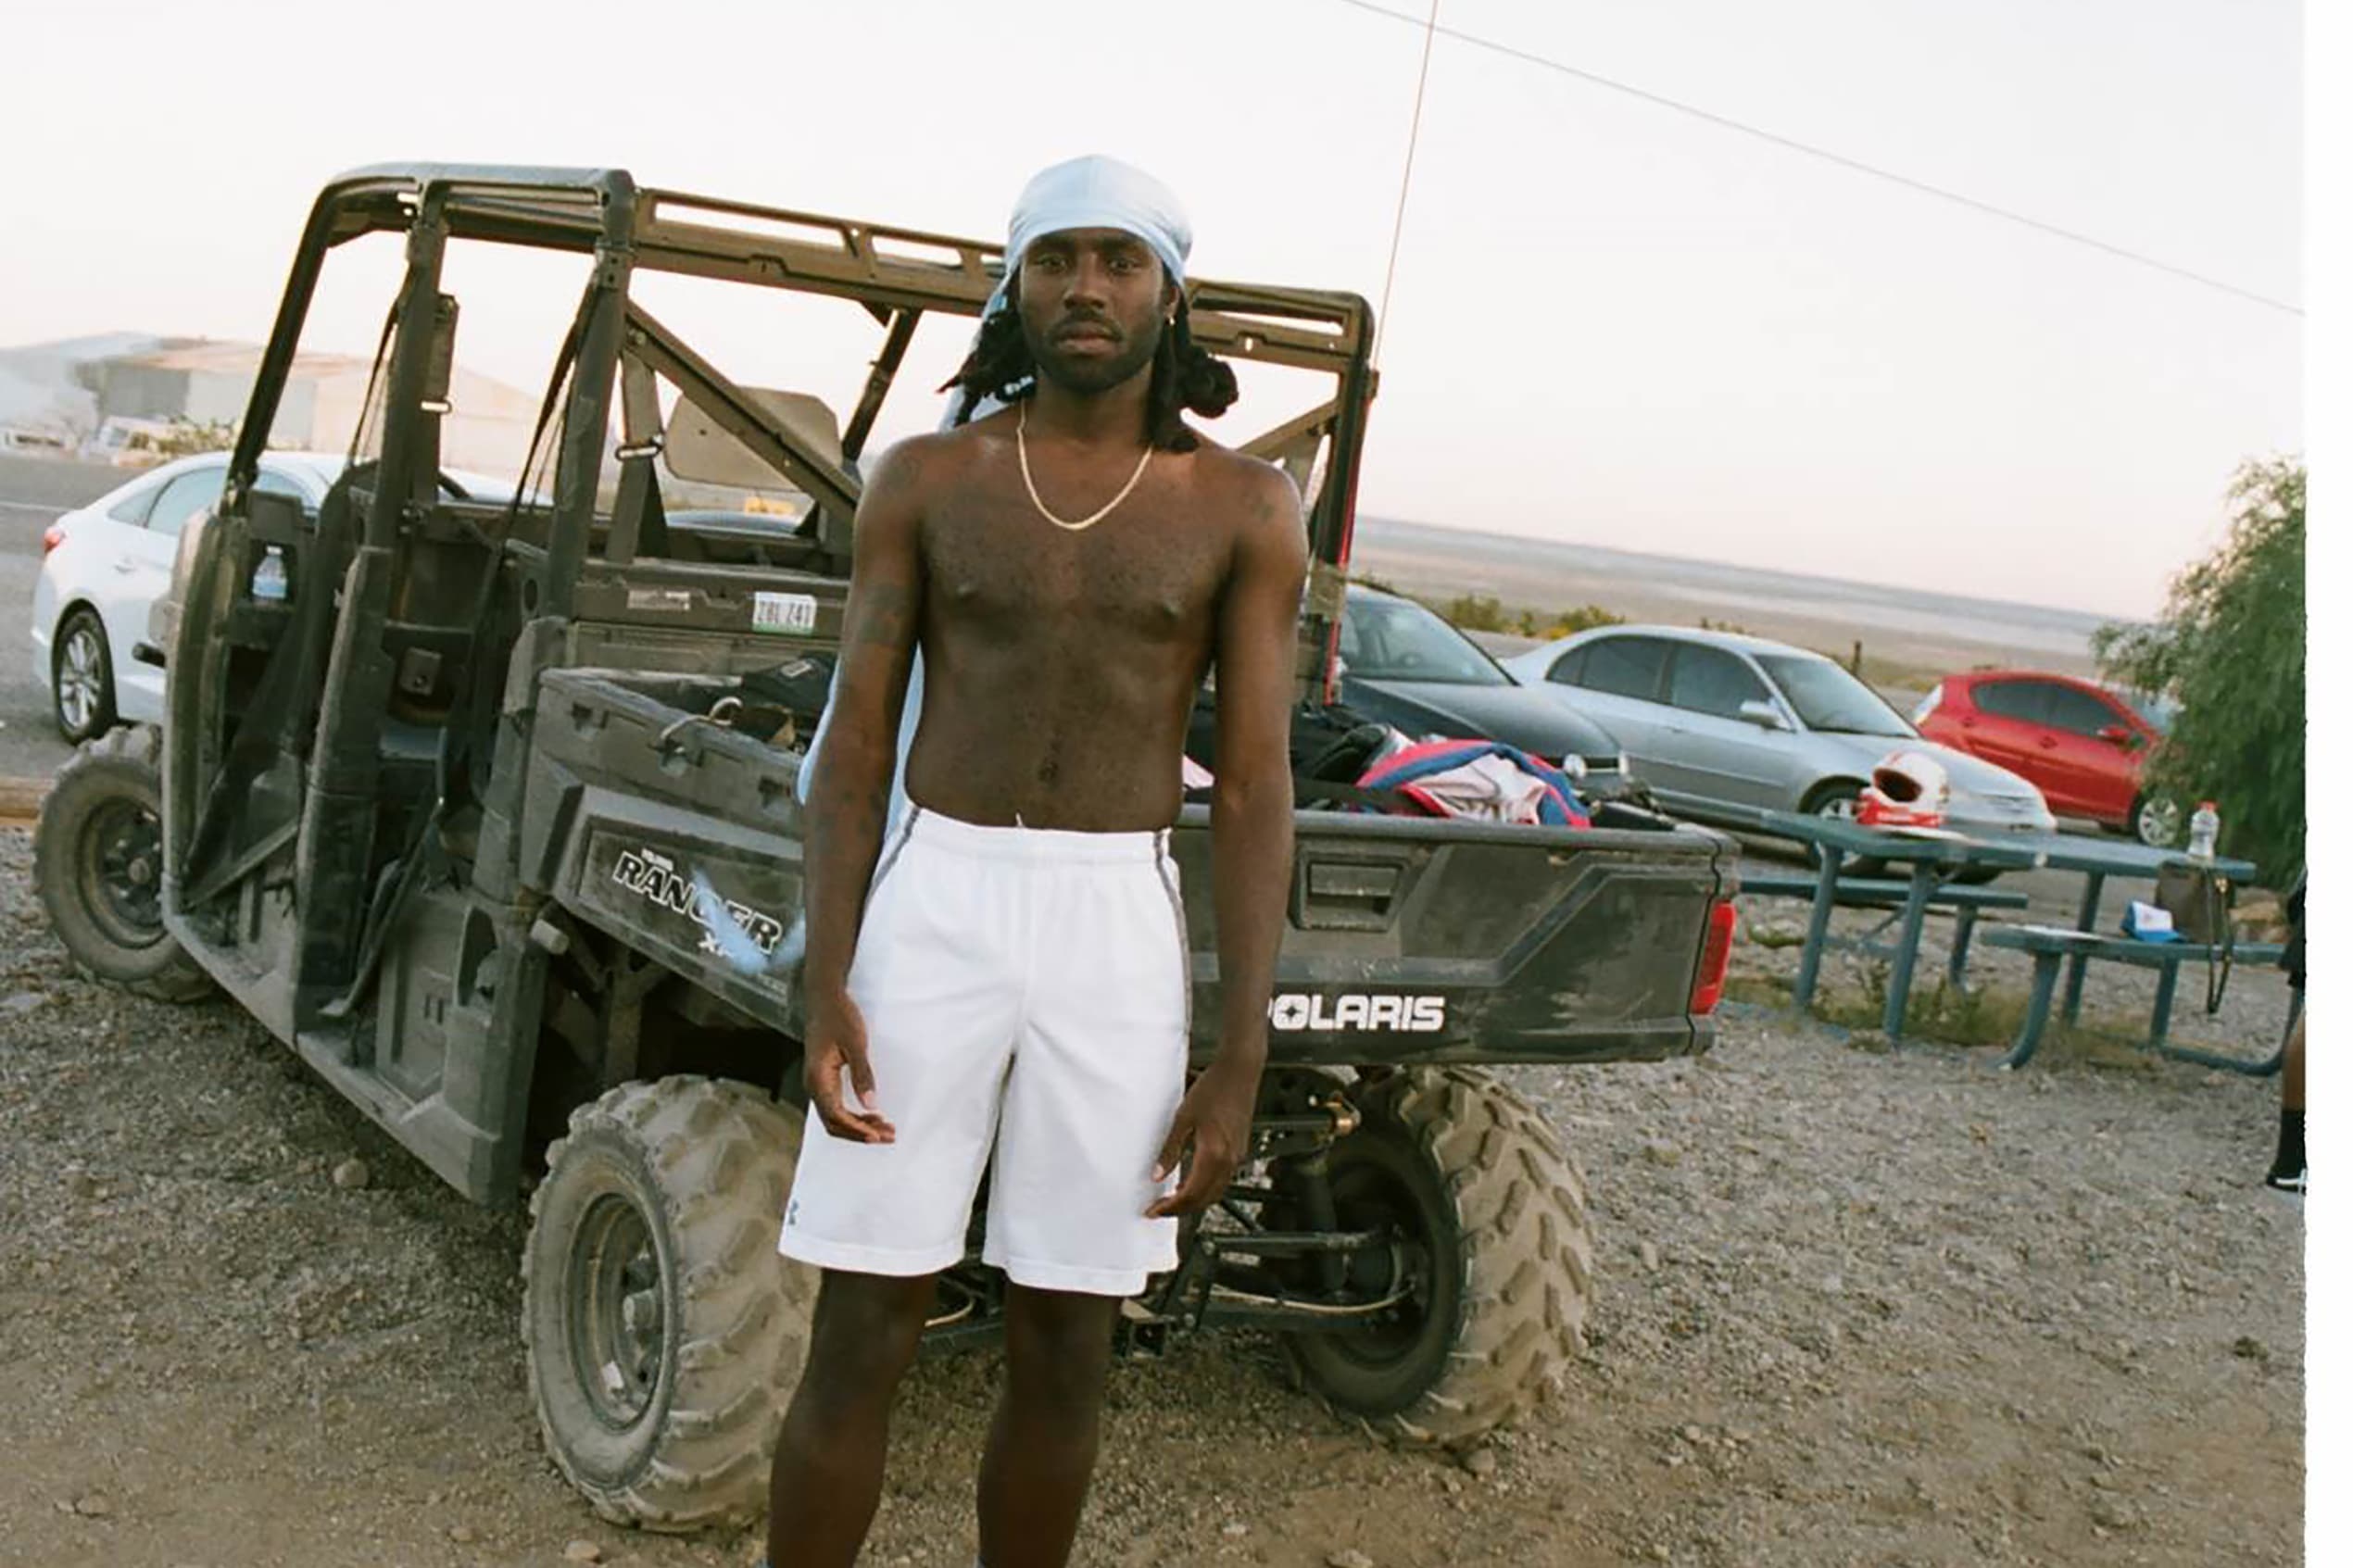 Blood Orange pictured in shorts, standing in front of a black jeep